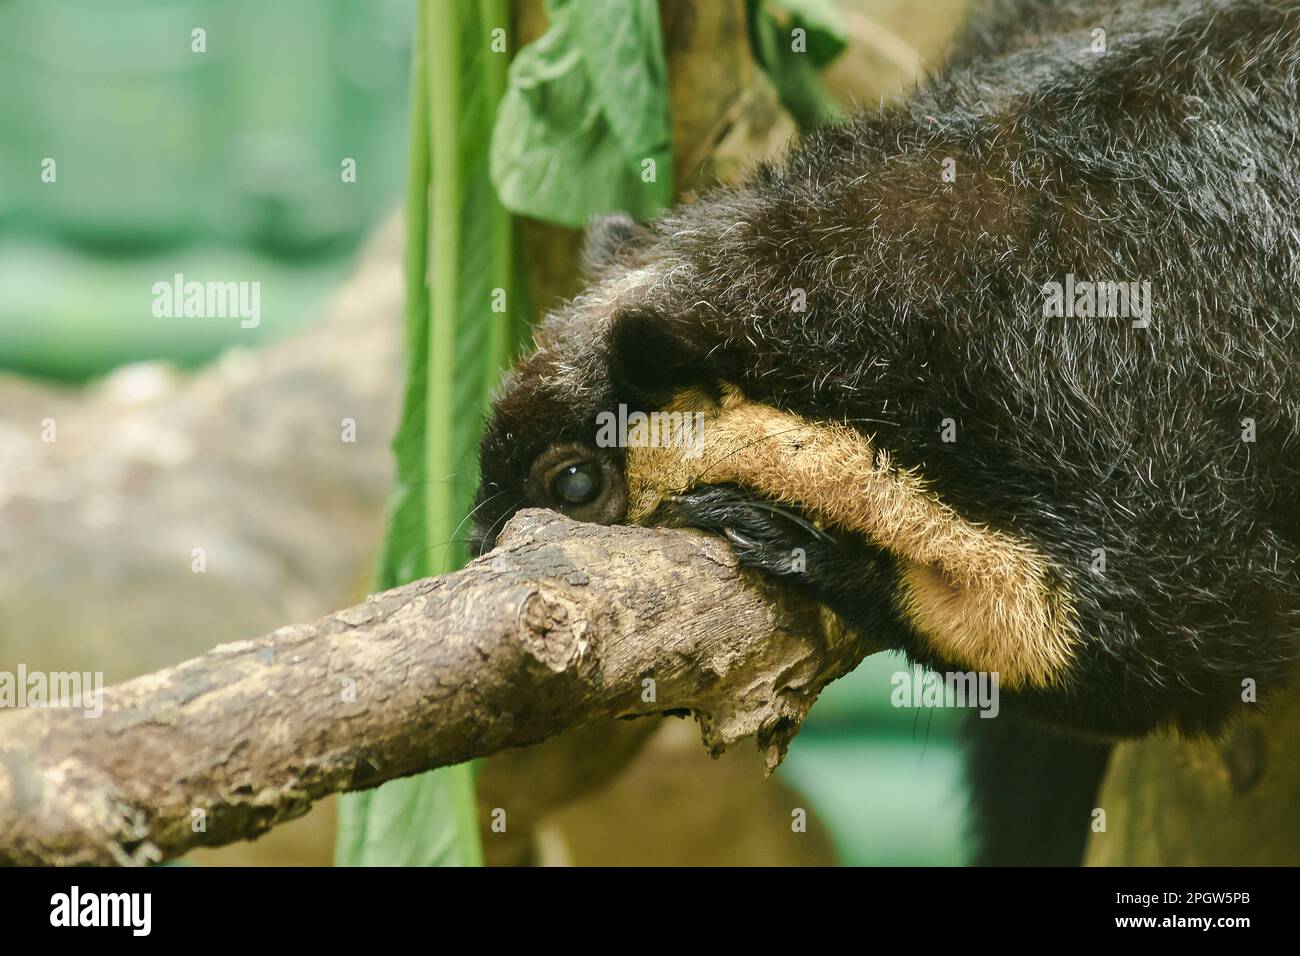 The Black Giant Squirrel was lying on a large branch. Black Giant Squirrel (Ratufa bicolor) is a large squirrel. The feathers on the top of the body a Stock Photo